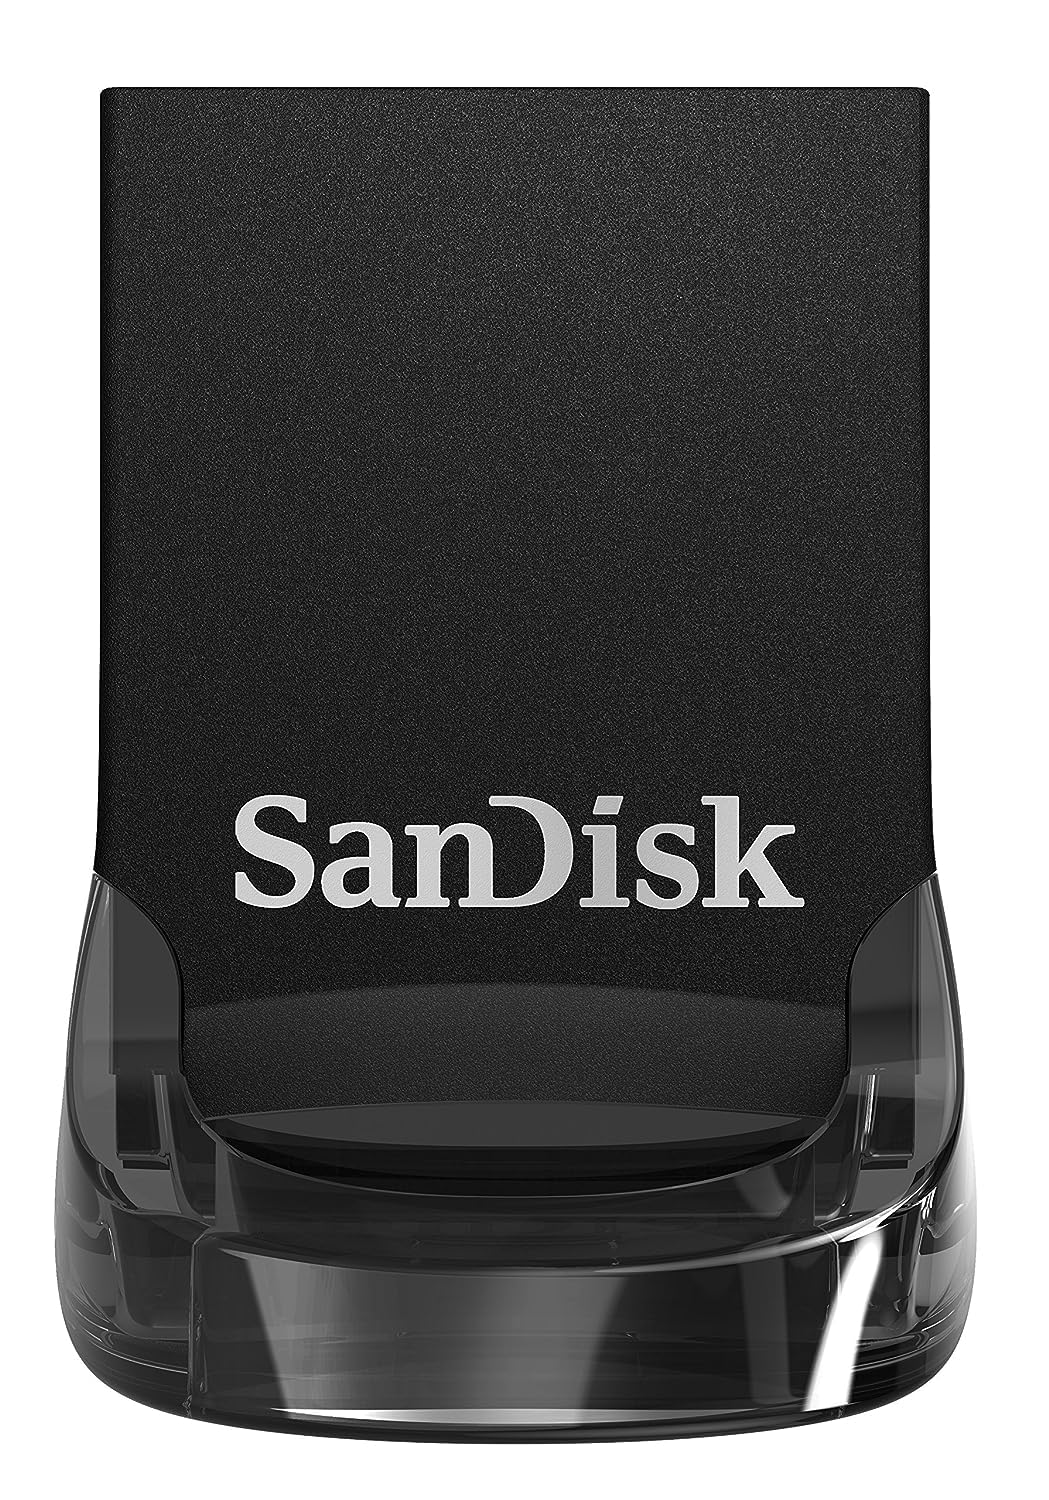 SanDisk 256GB Ultra Fit USB 3.1 Flash Drive $13 + Free Shipping w/ Prime or on orders $35+